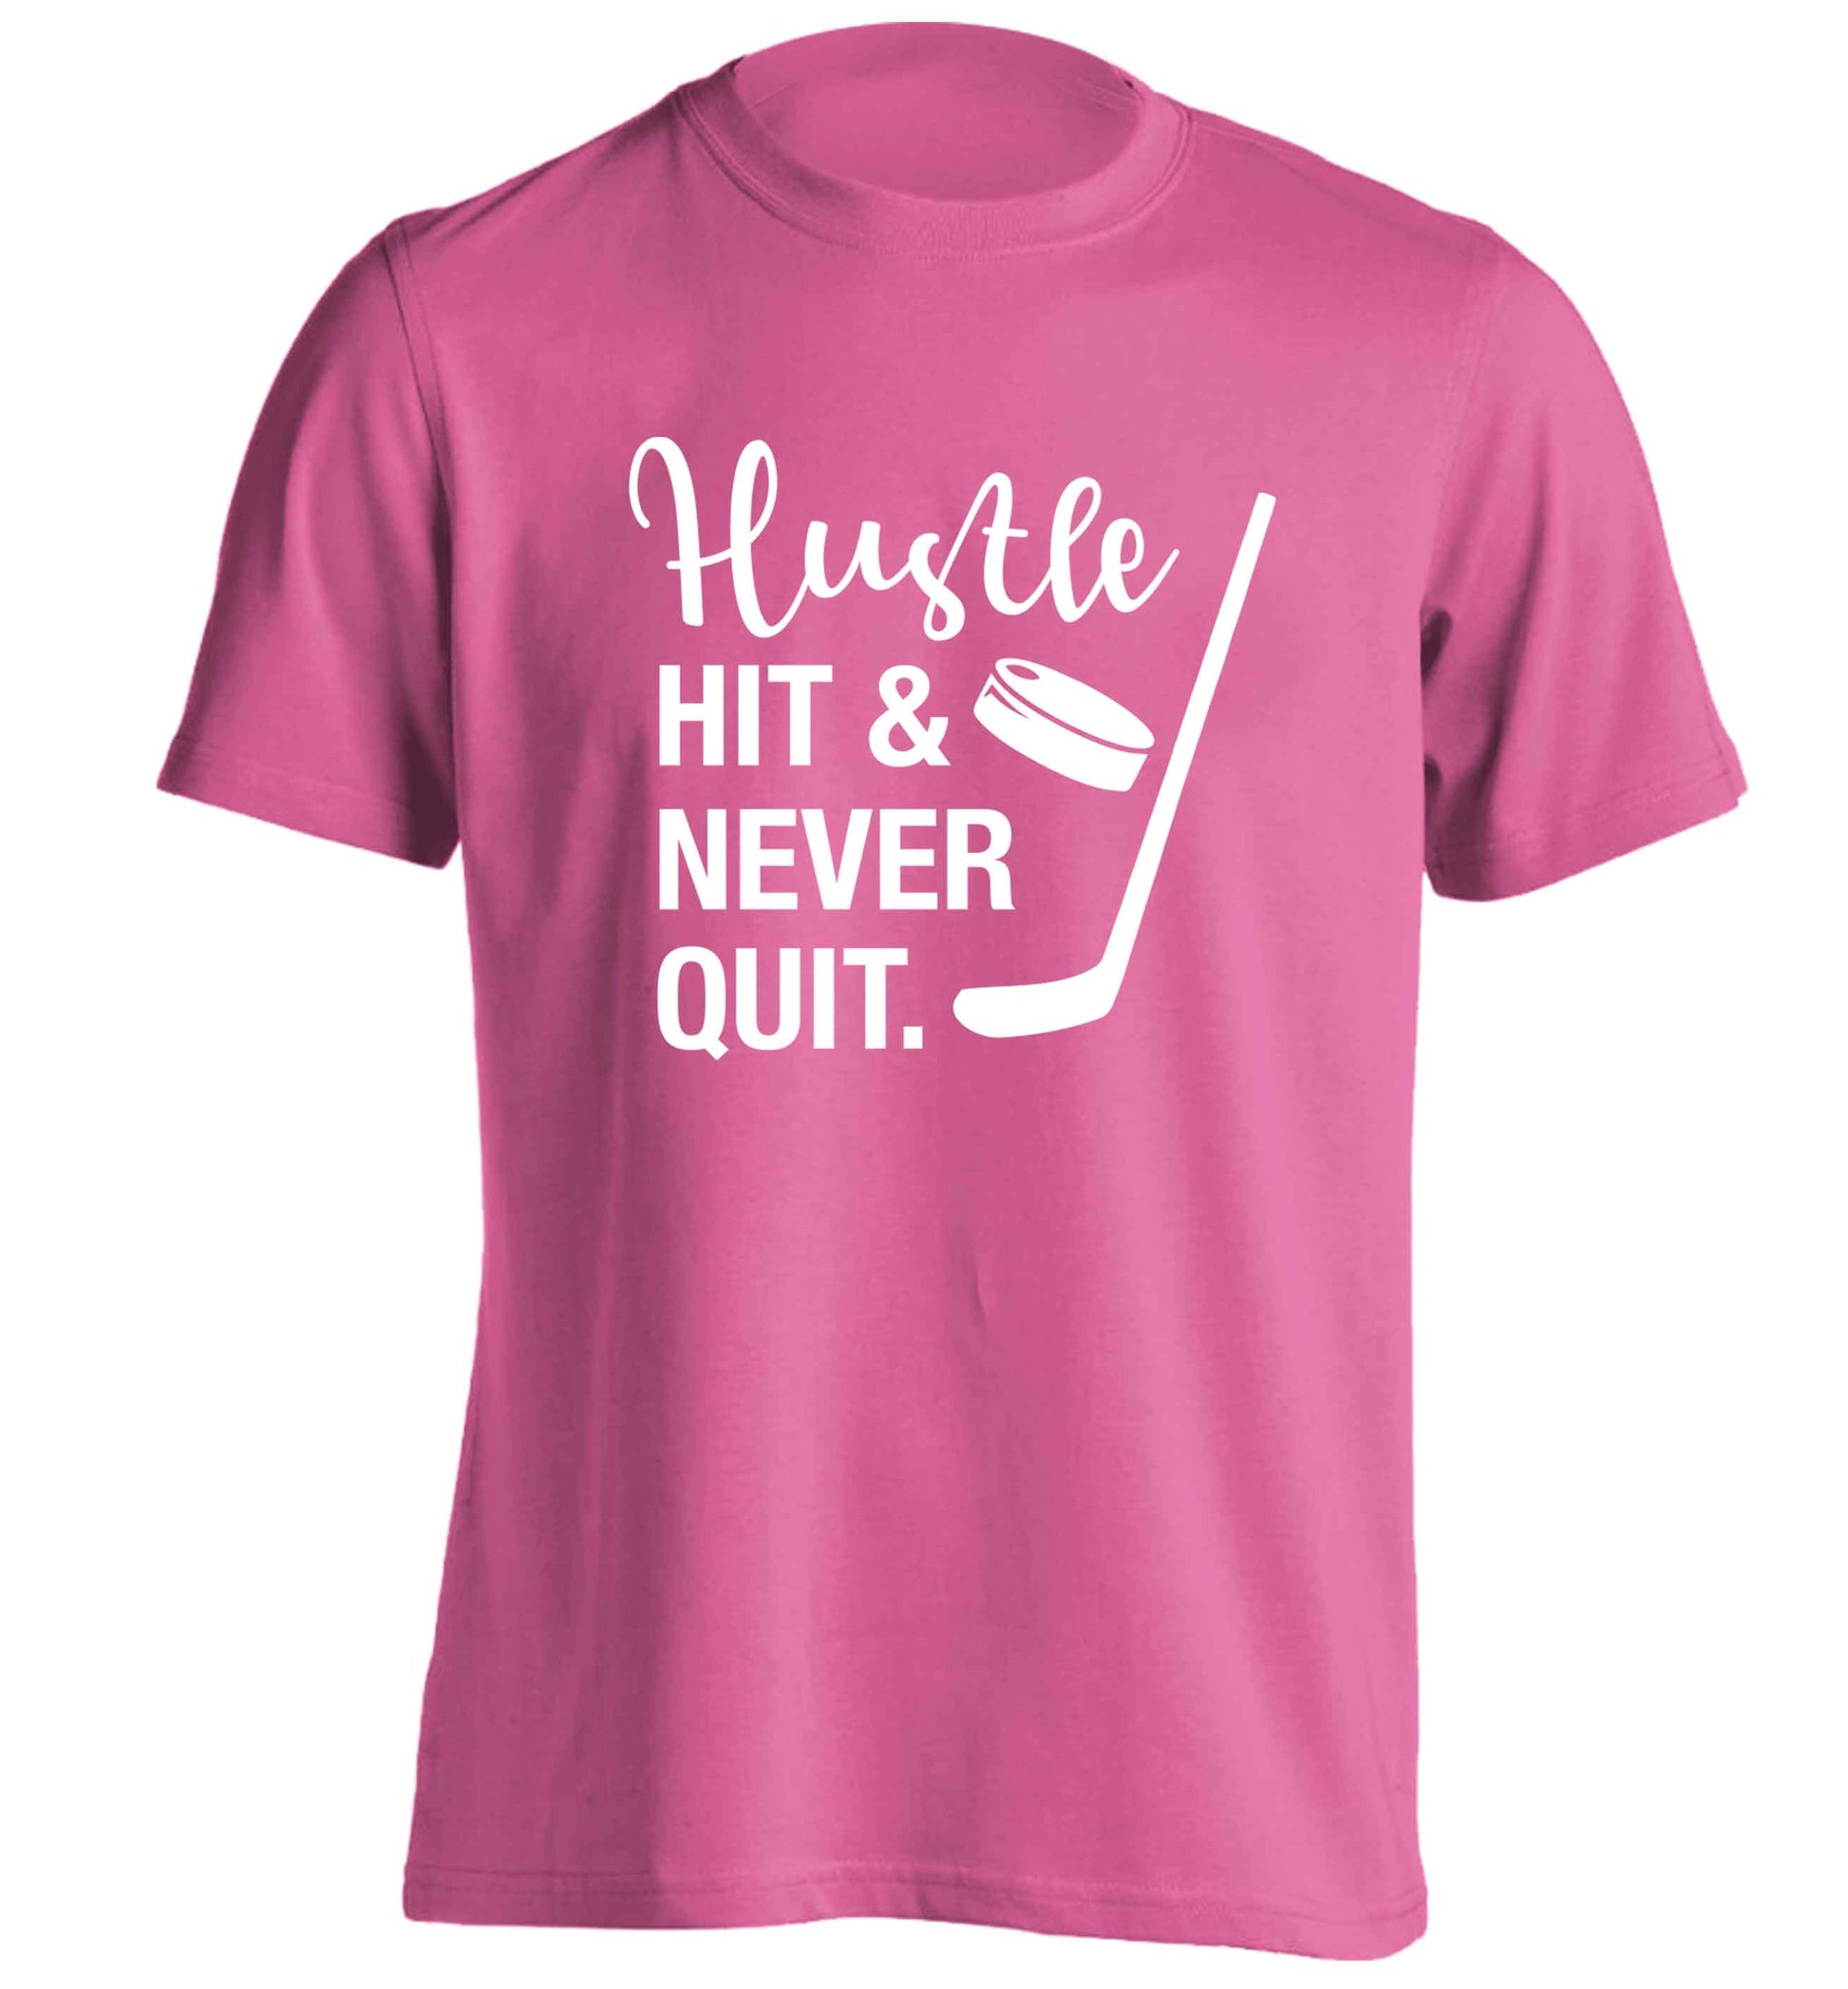 Hustle hit and never quit adults unisex pink Tshirt 2XL